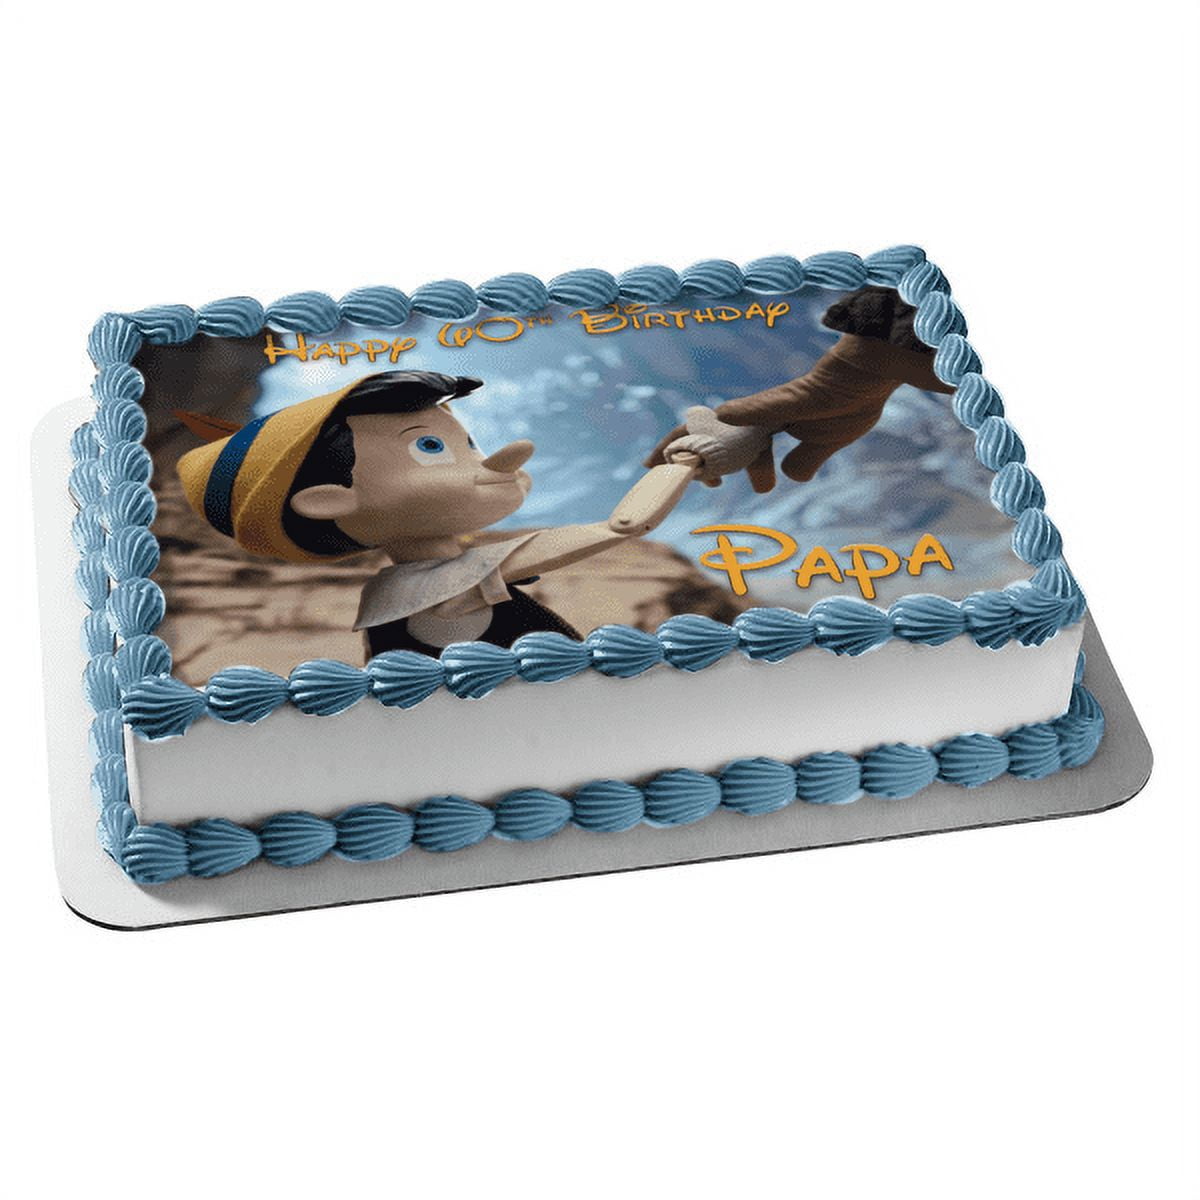 Pinocchio Geppetto Hand In Hand Edible Cake Topper Image ABPID56618 - Walmart.com